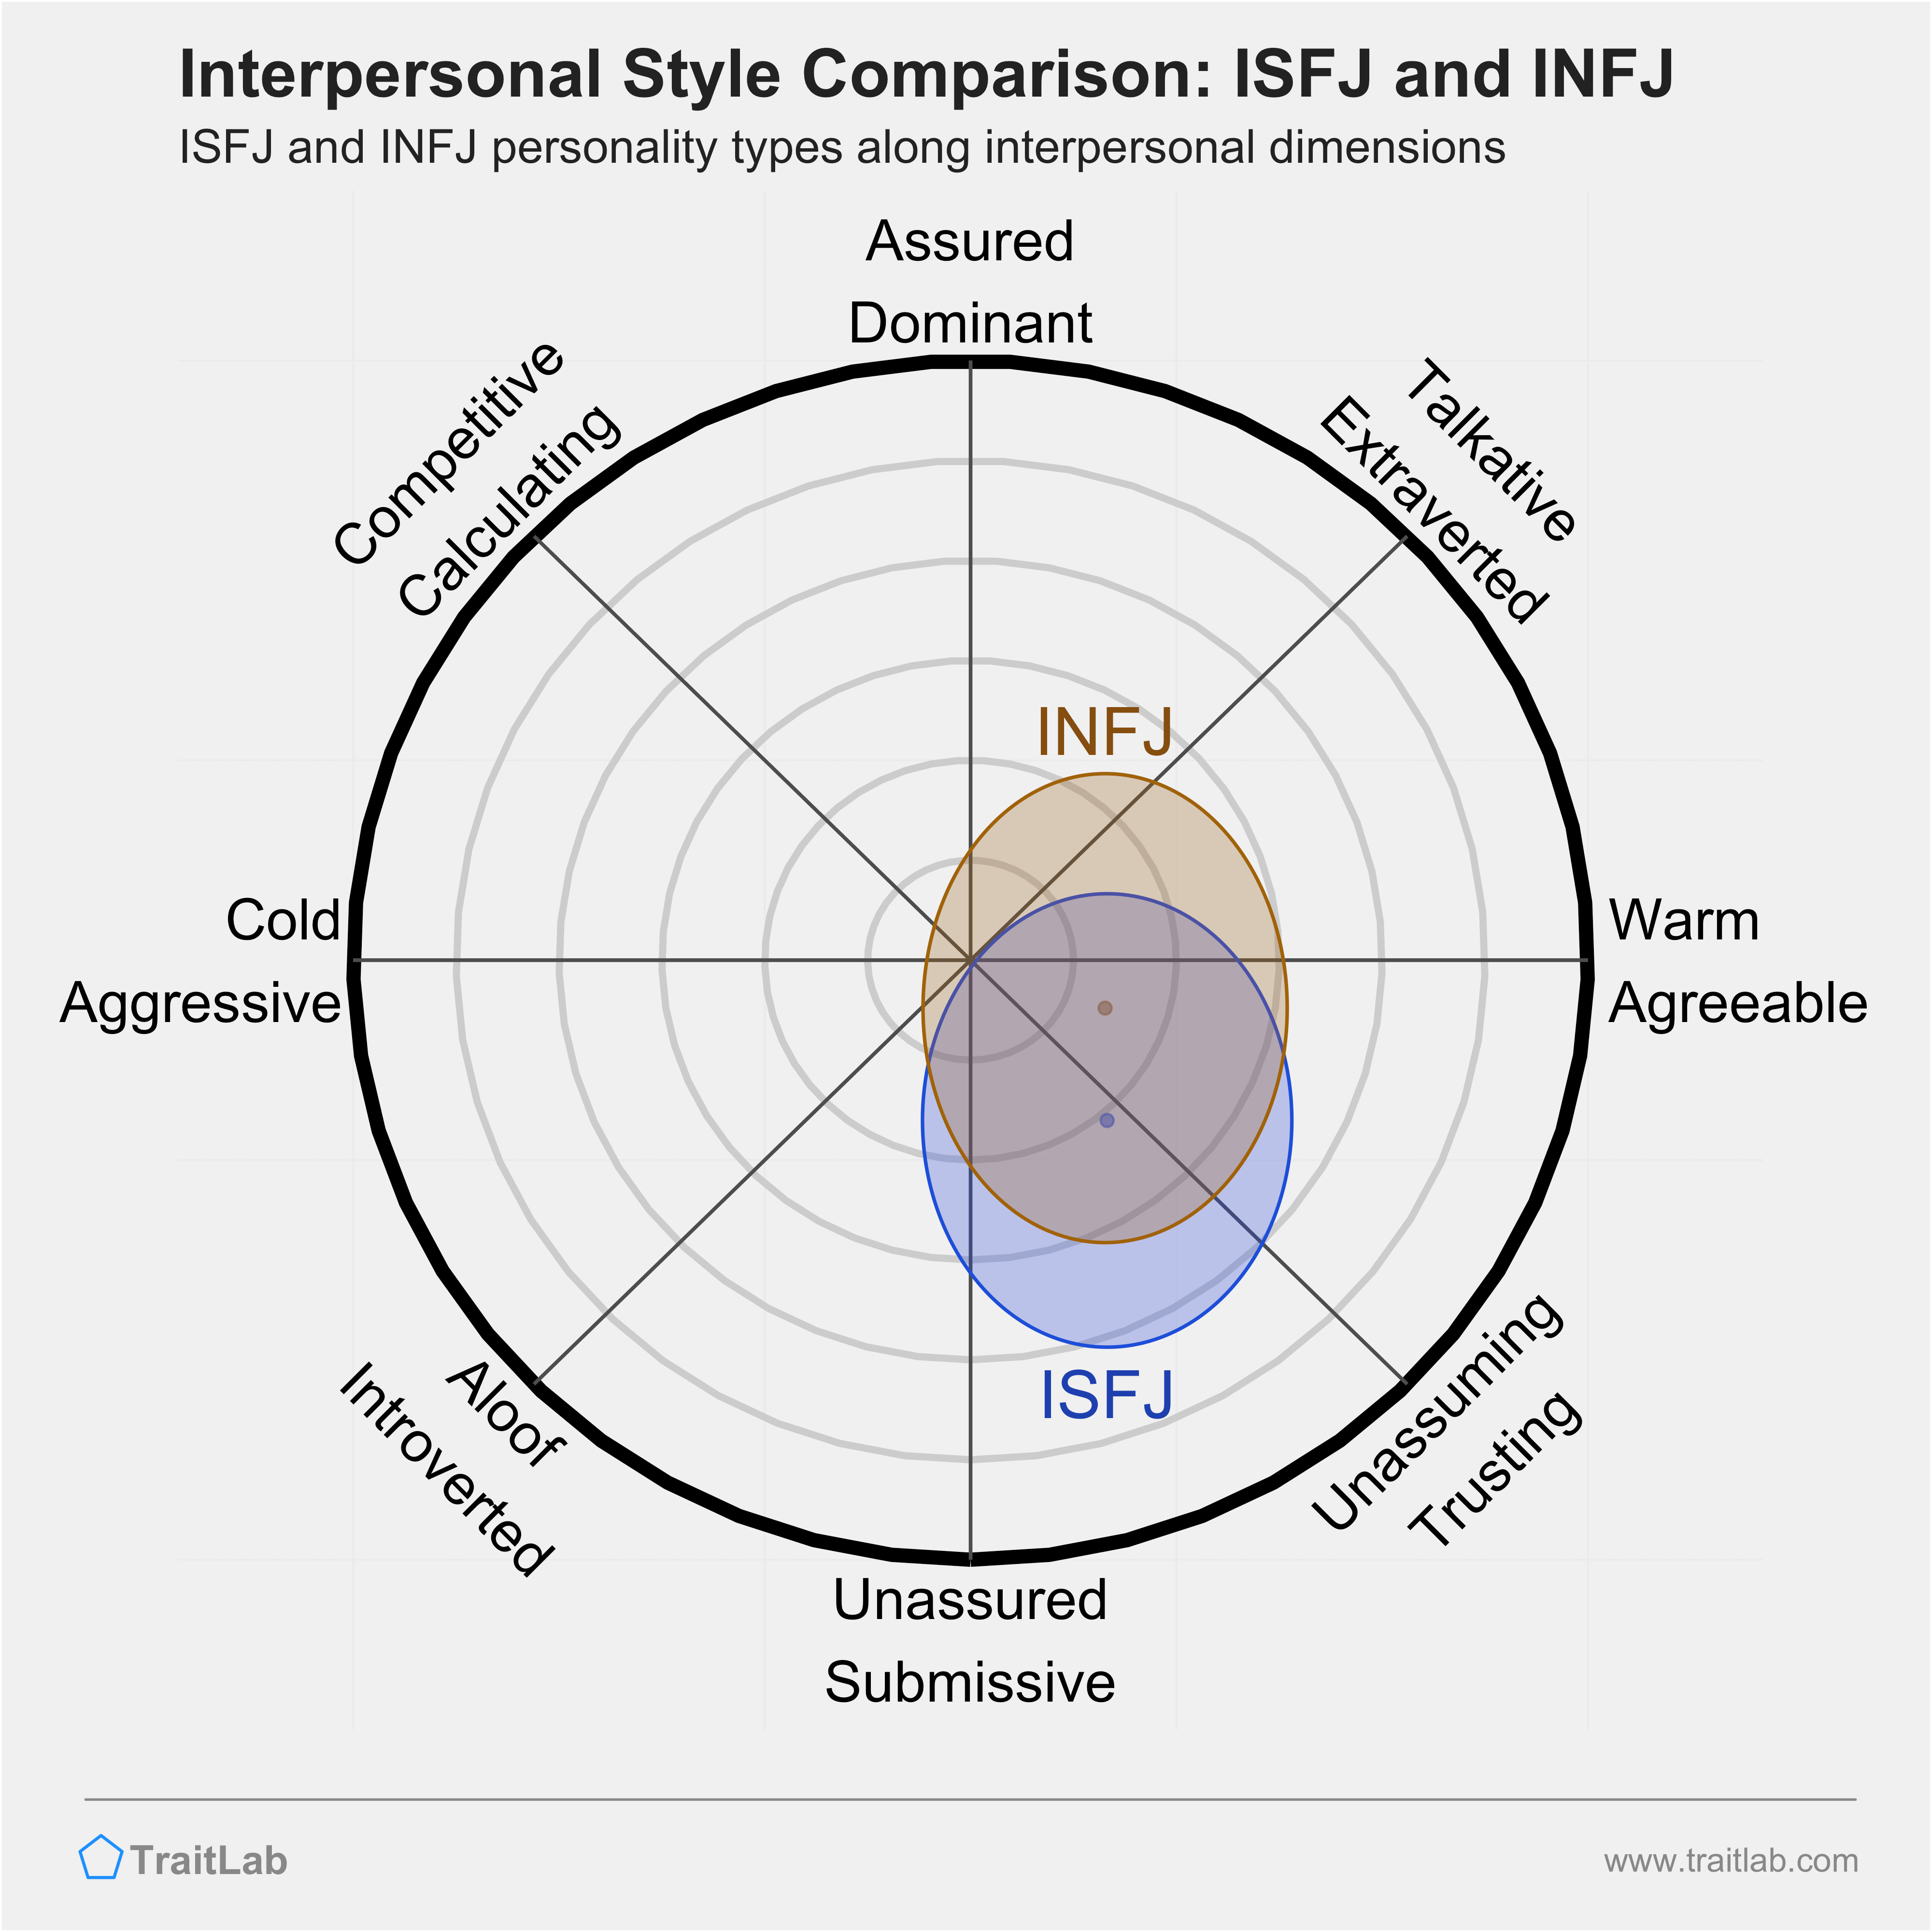 ISFJ and INFJ comparison across interpersonal dimensions